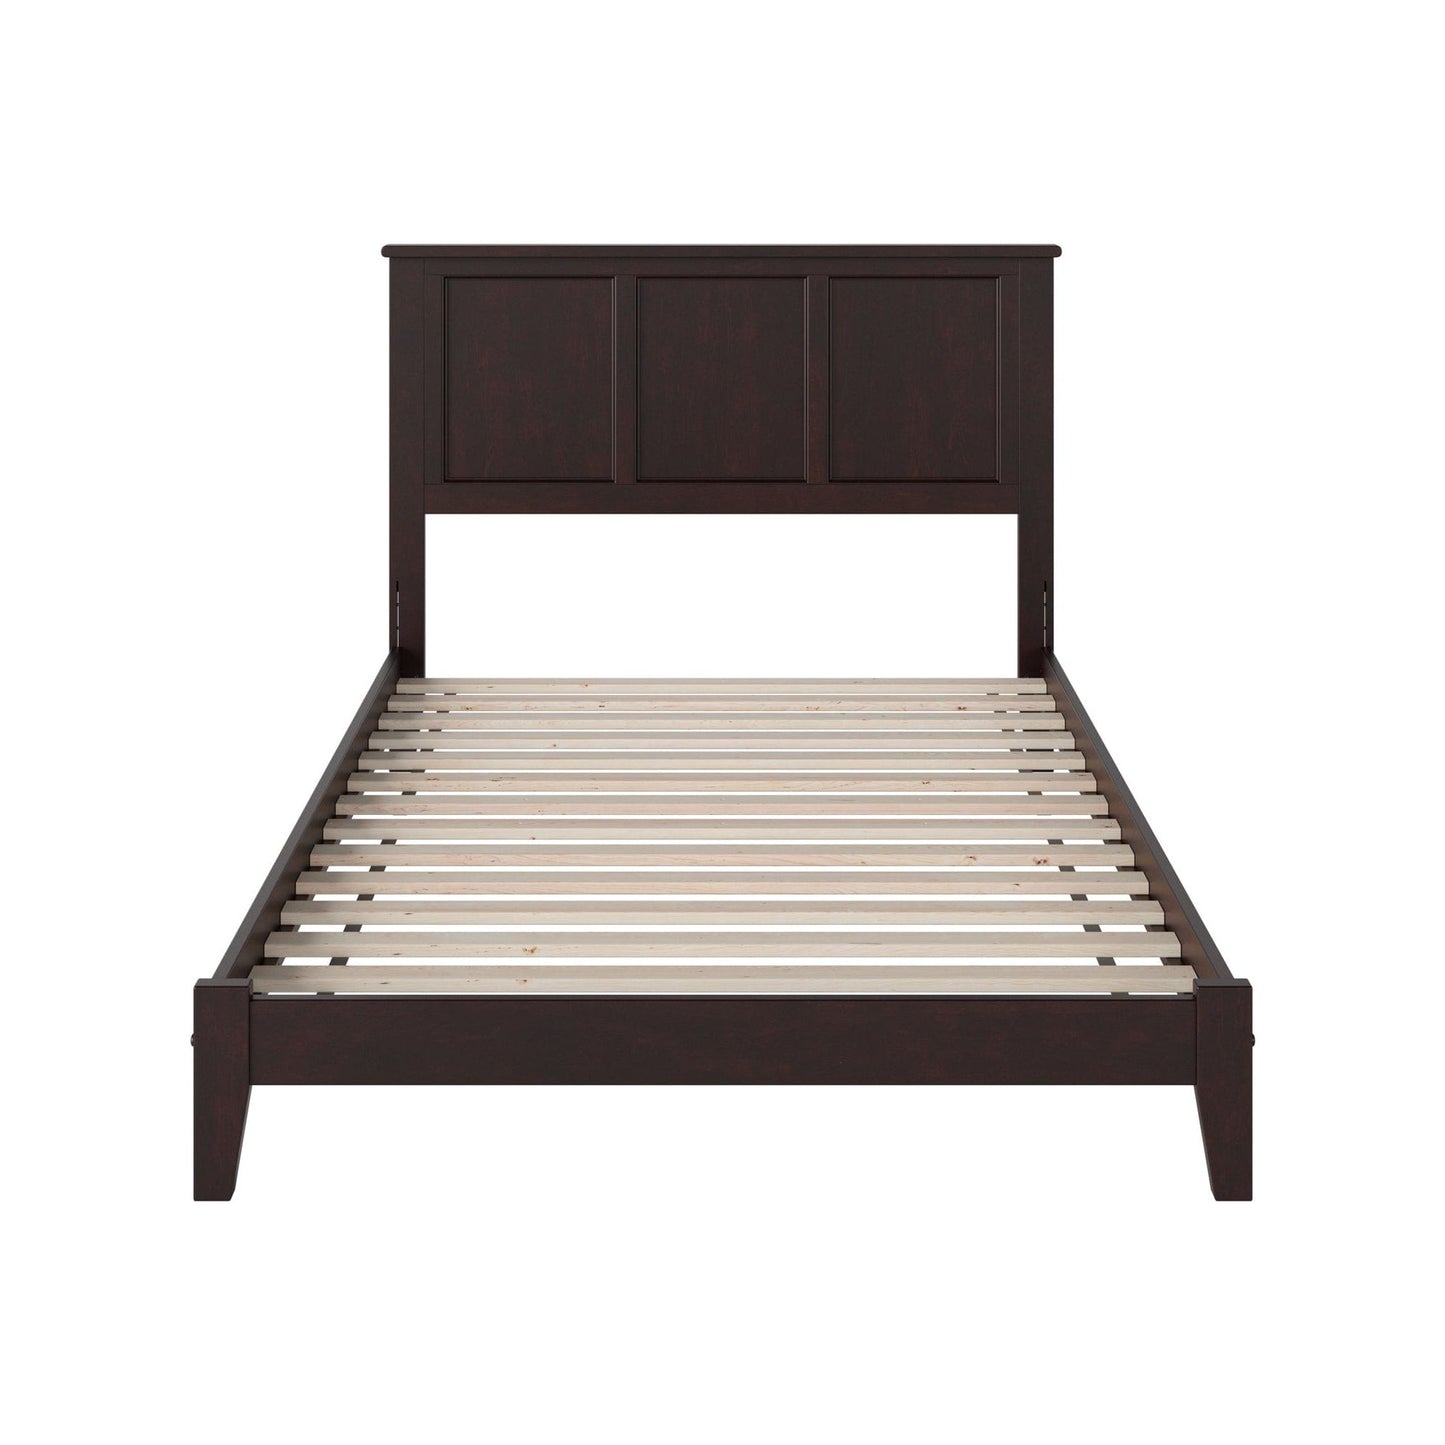 AFI Furnishings Madison Full Platform Bed with Open Foot Board